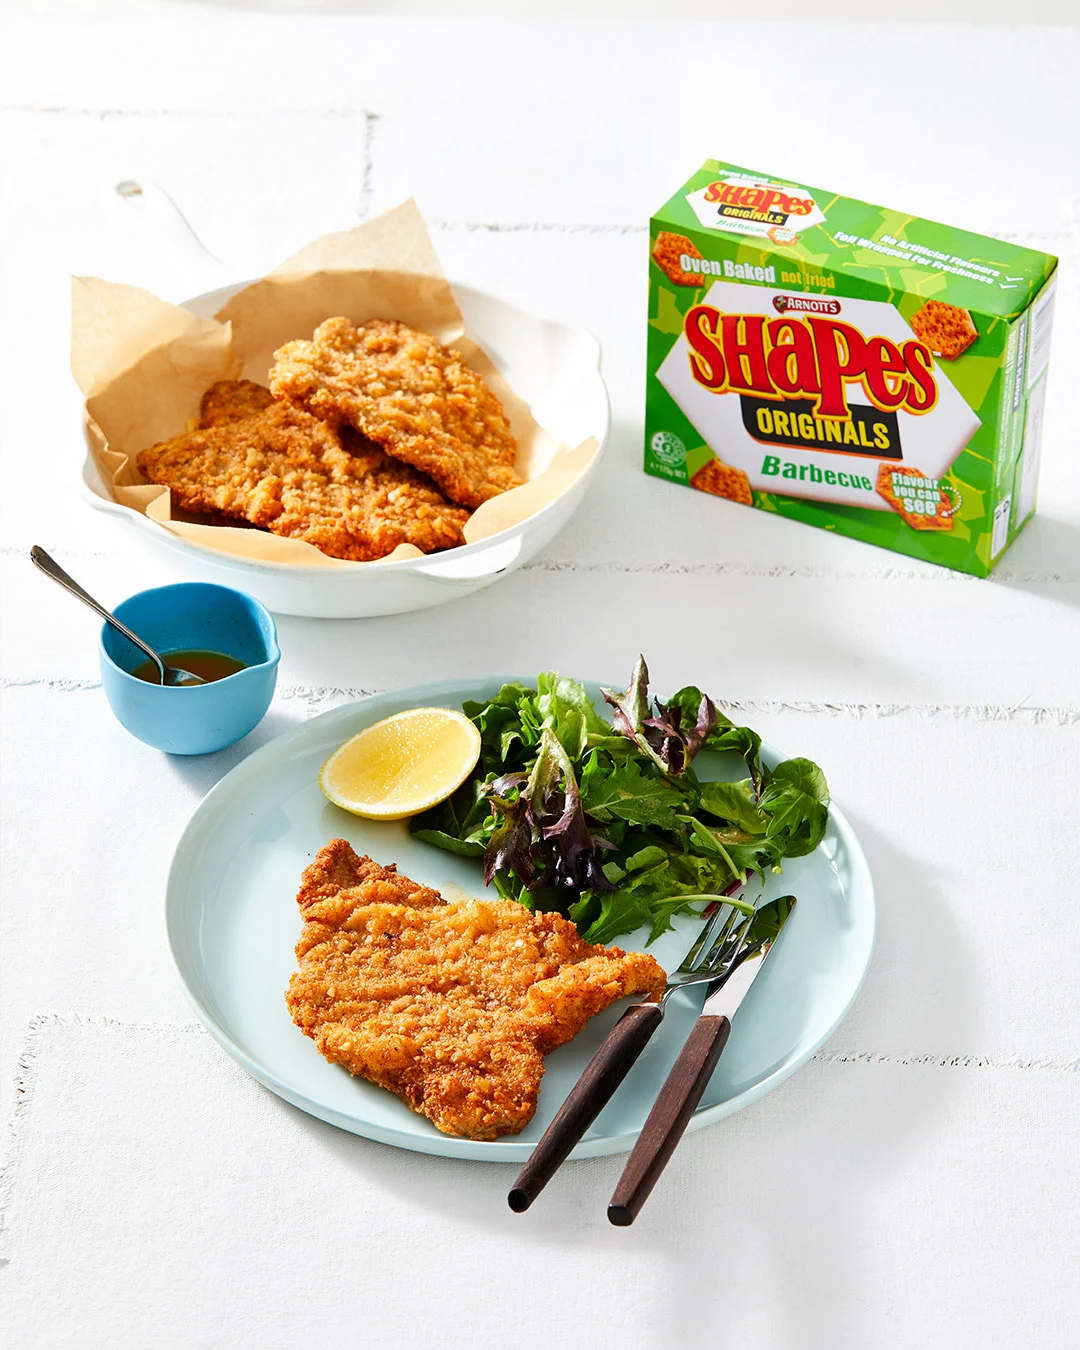 Hero Image Recipe Shapes Barbecue Veal Schnitzel